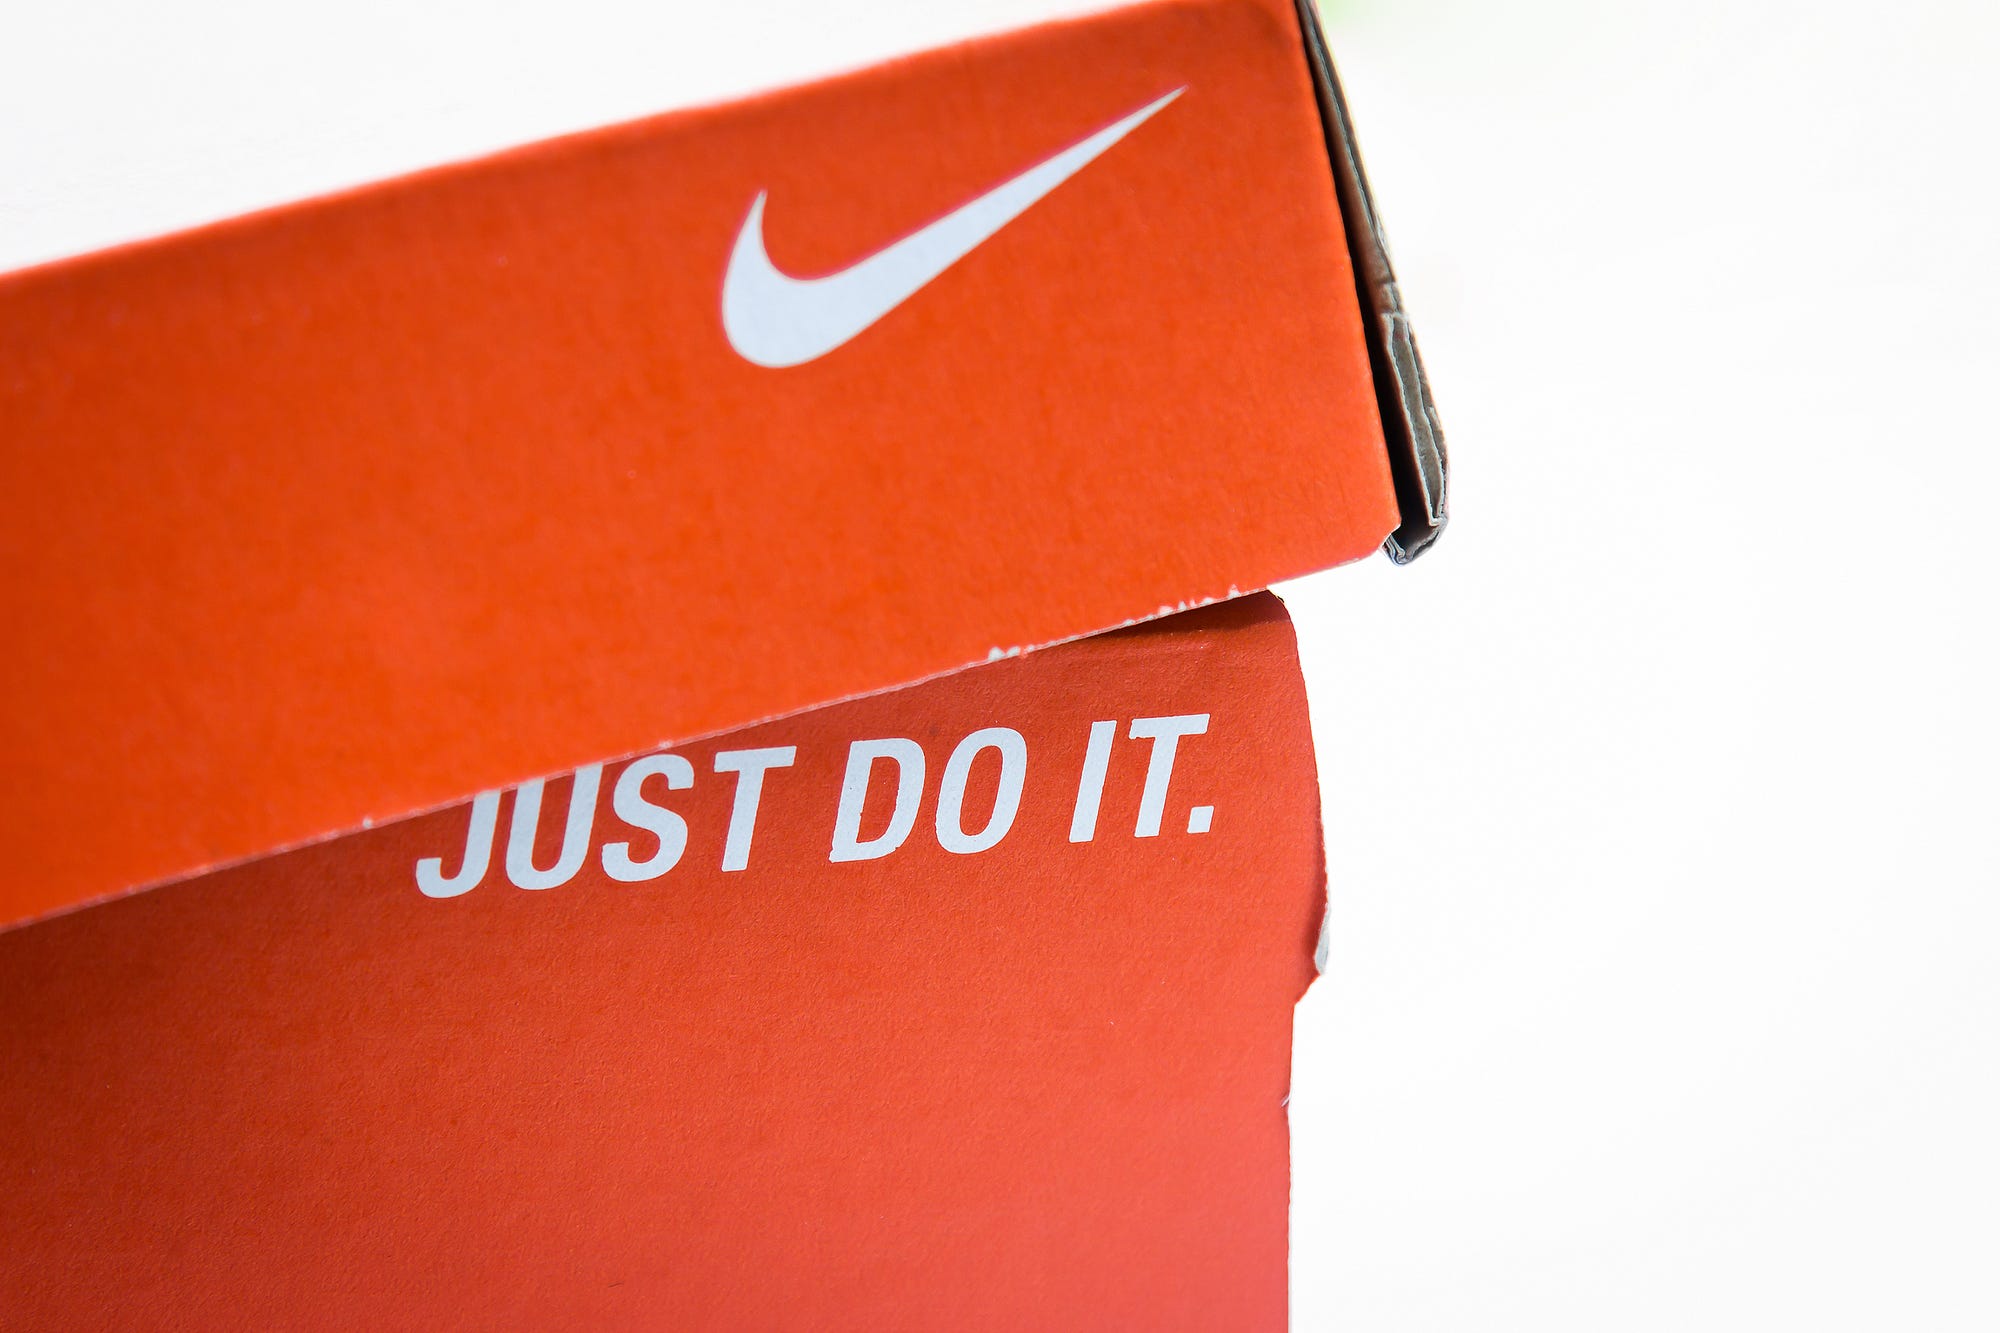 Nike's 'Just Do It' is the best in history | by Mason | Medium